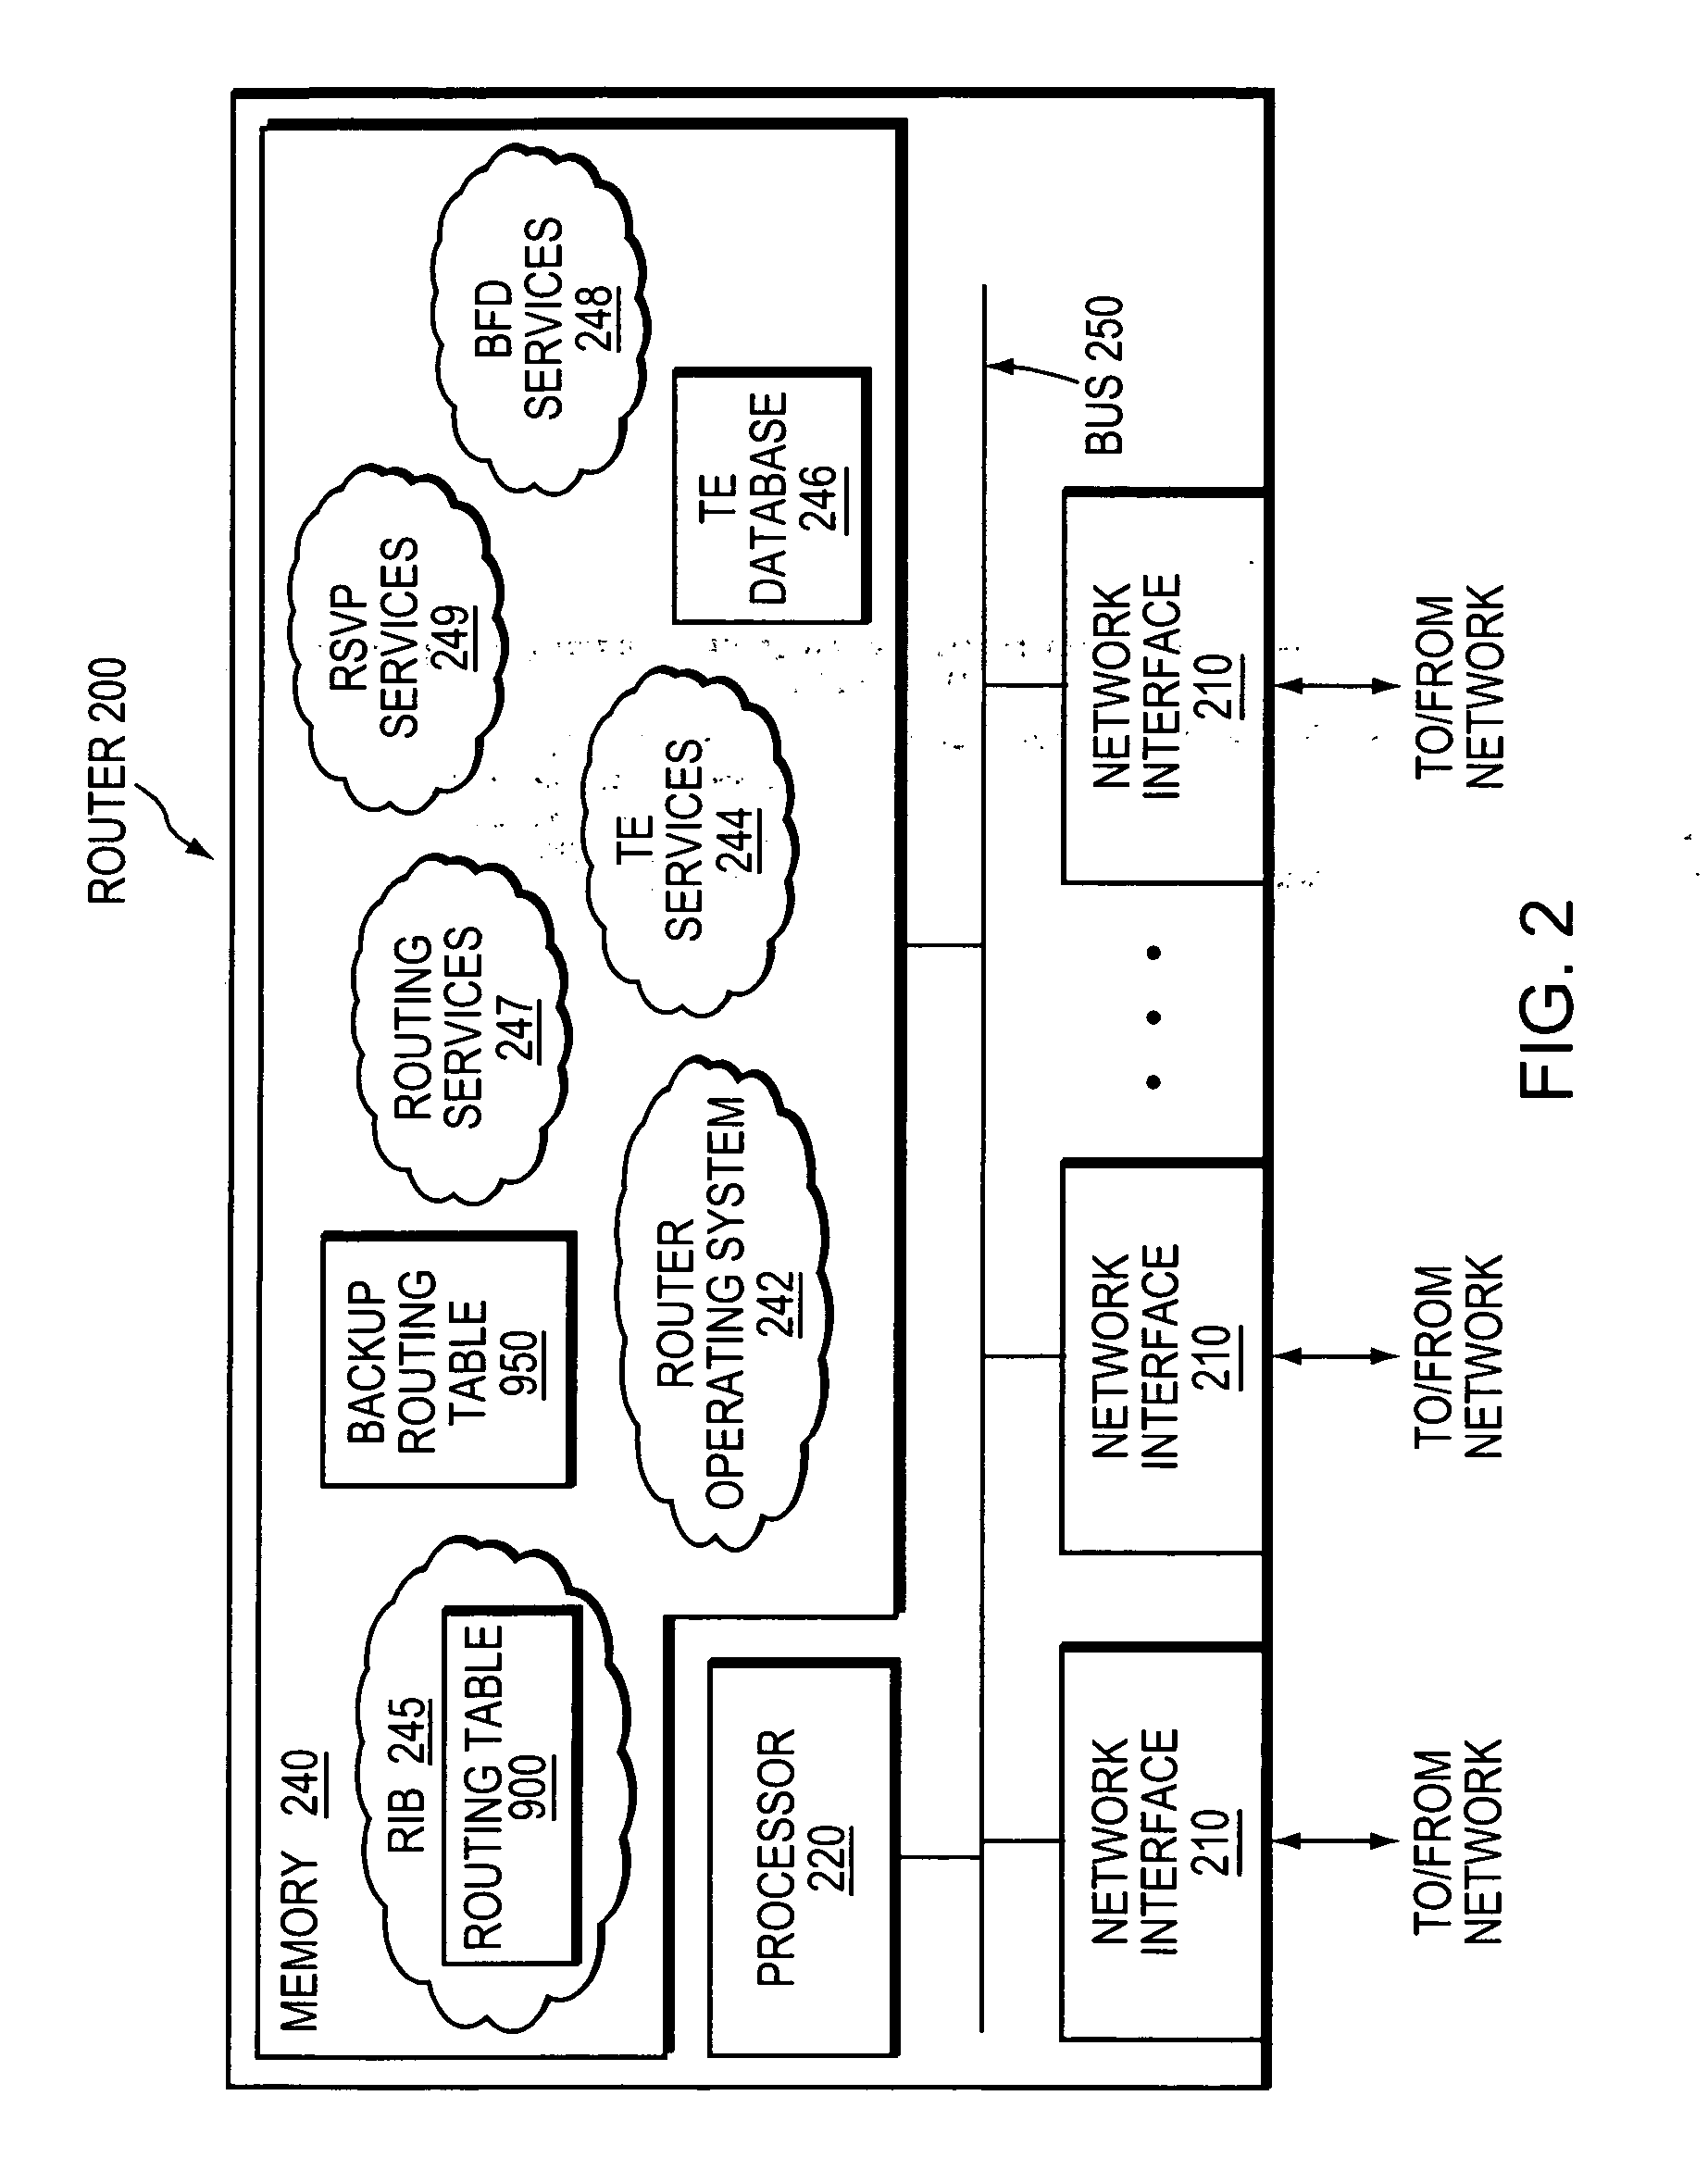 Dynamic protection against failure of a head-end node of one or more TE-LSPs